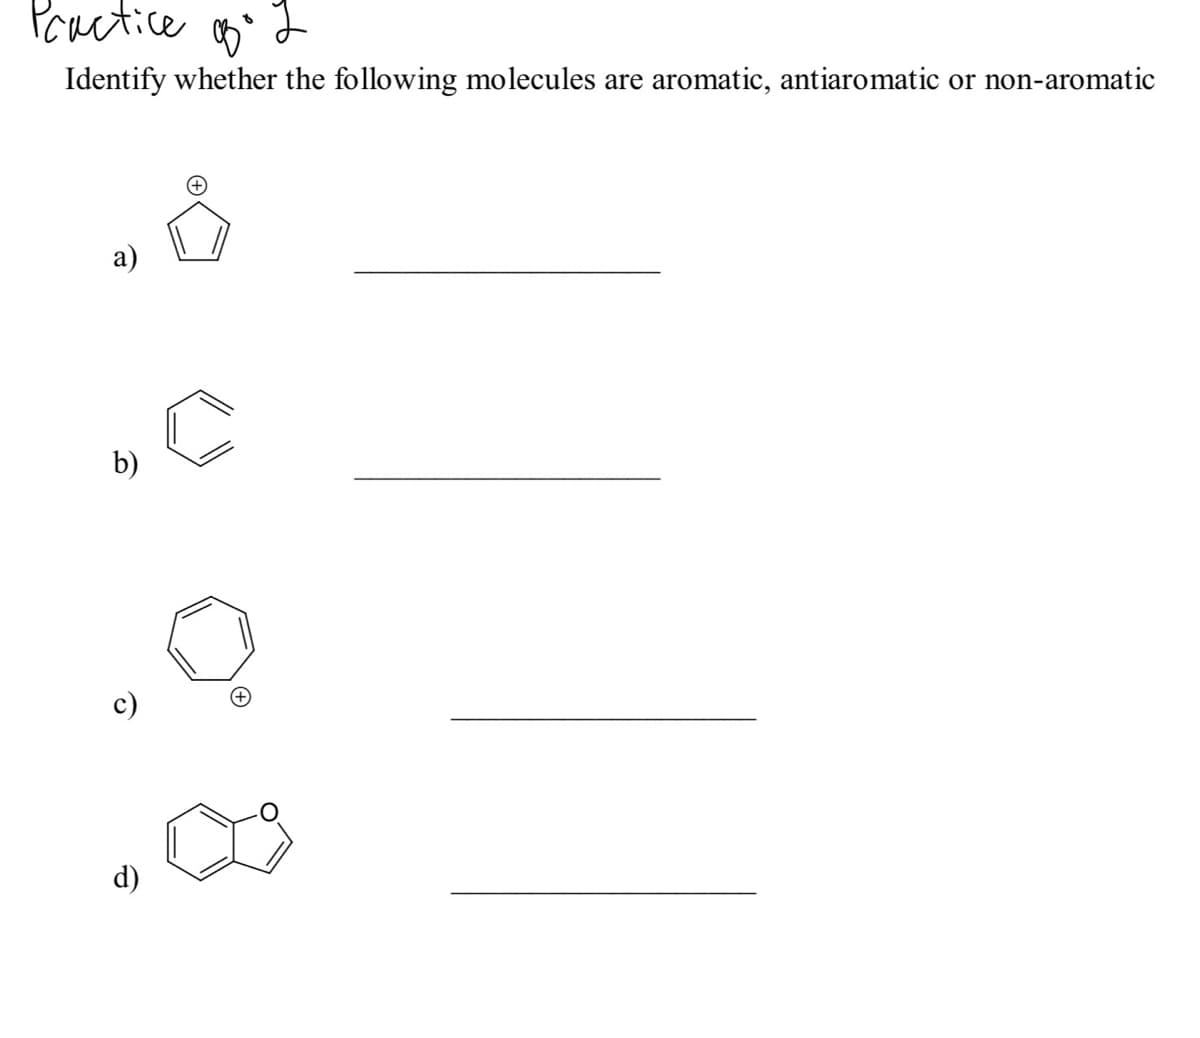 Pouctice
Identify whether the following molecules are aromatic, antiaromatic or non-aromatic
b)
